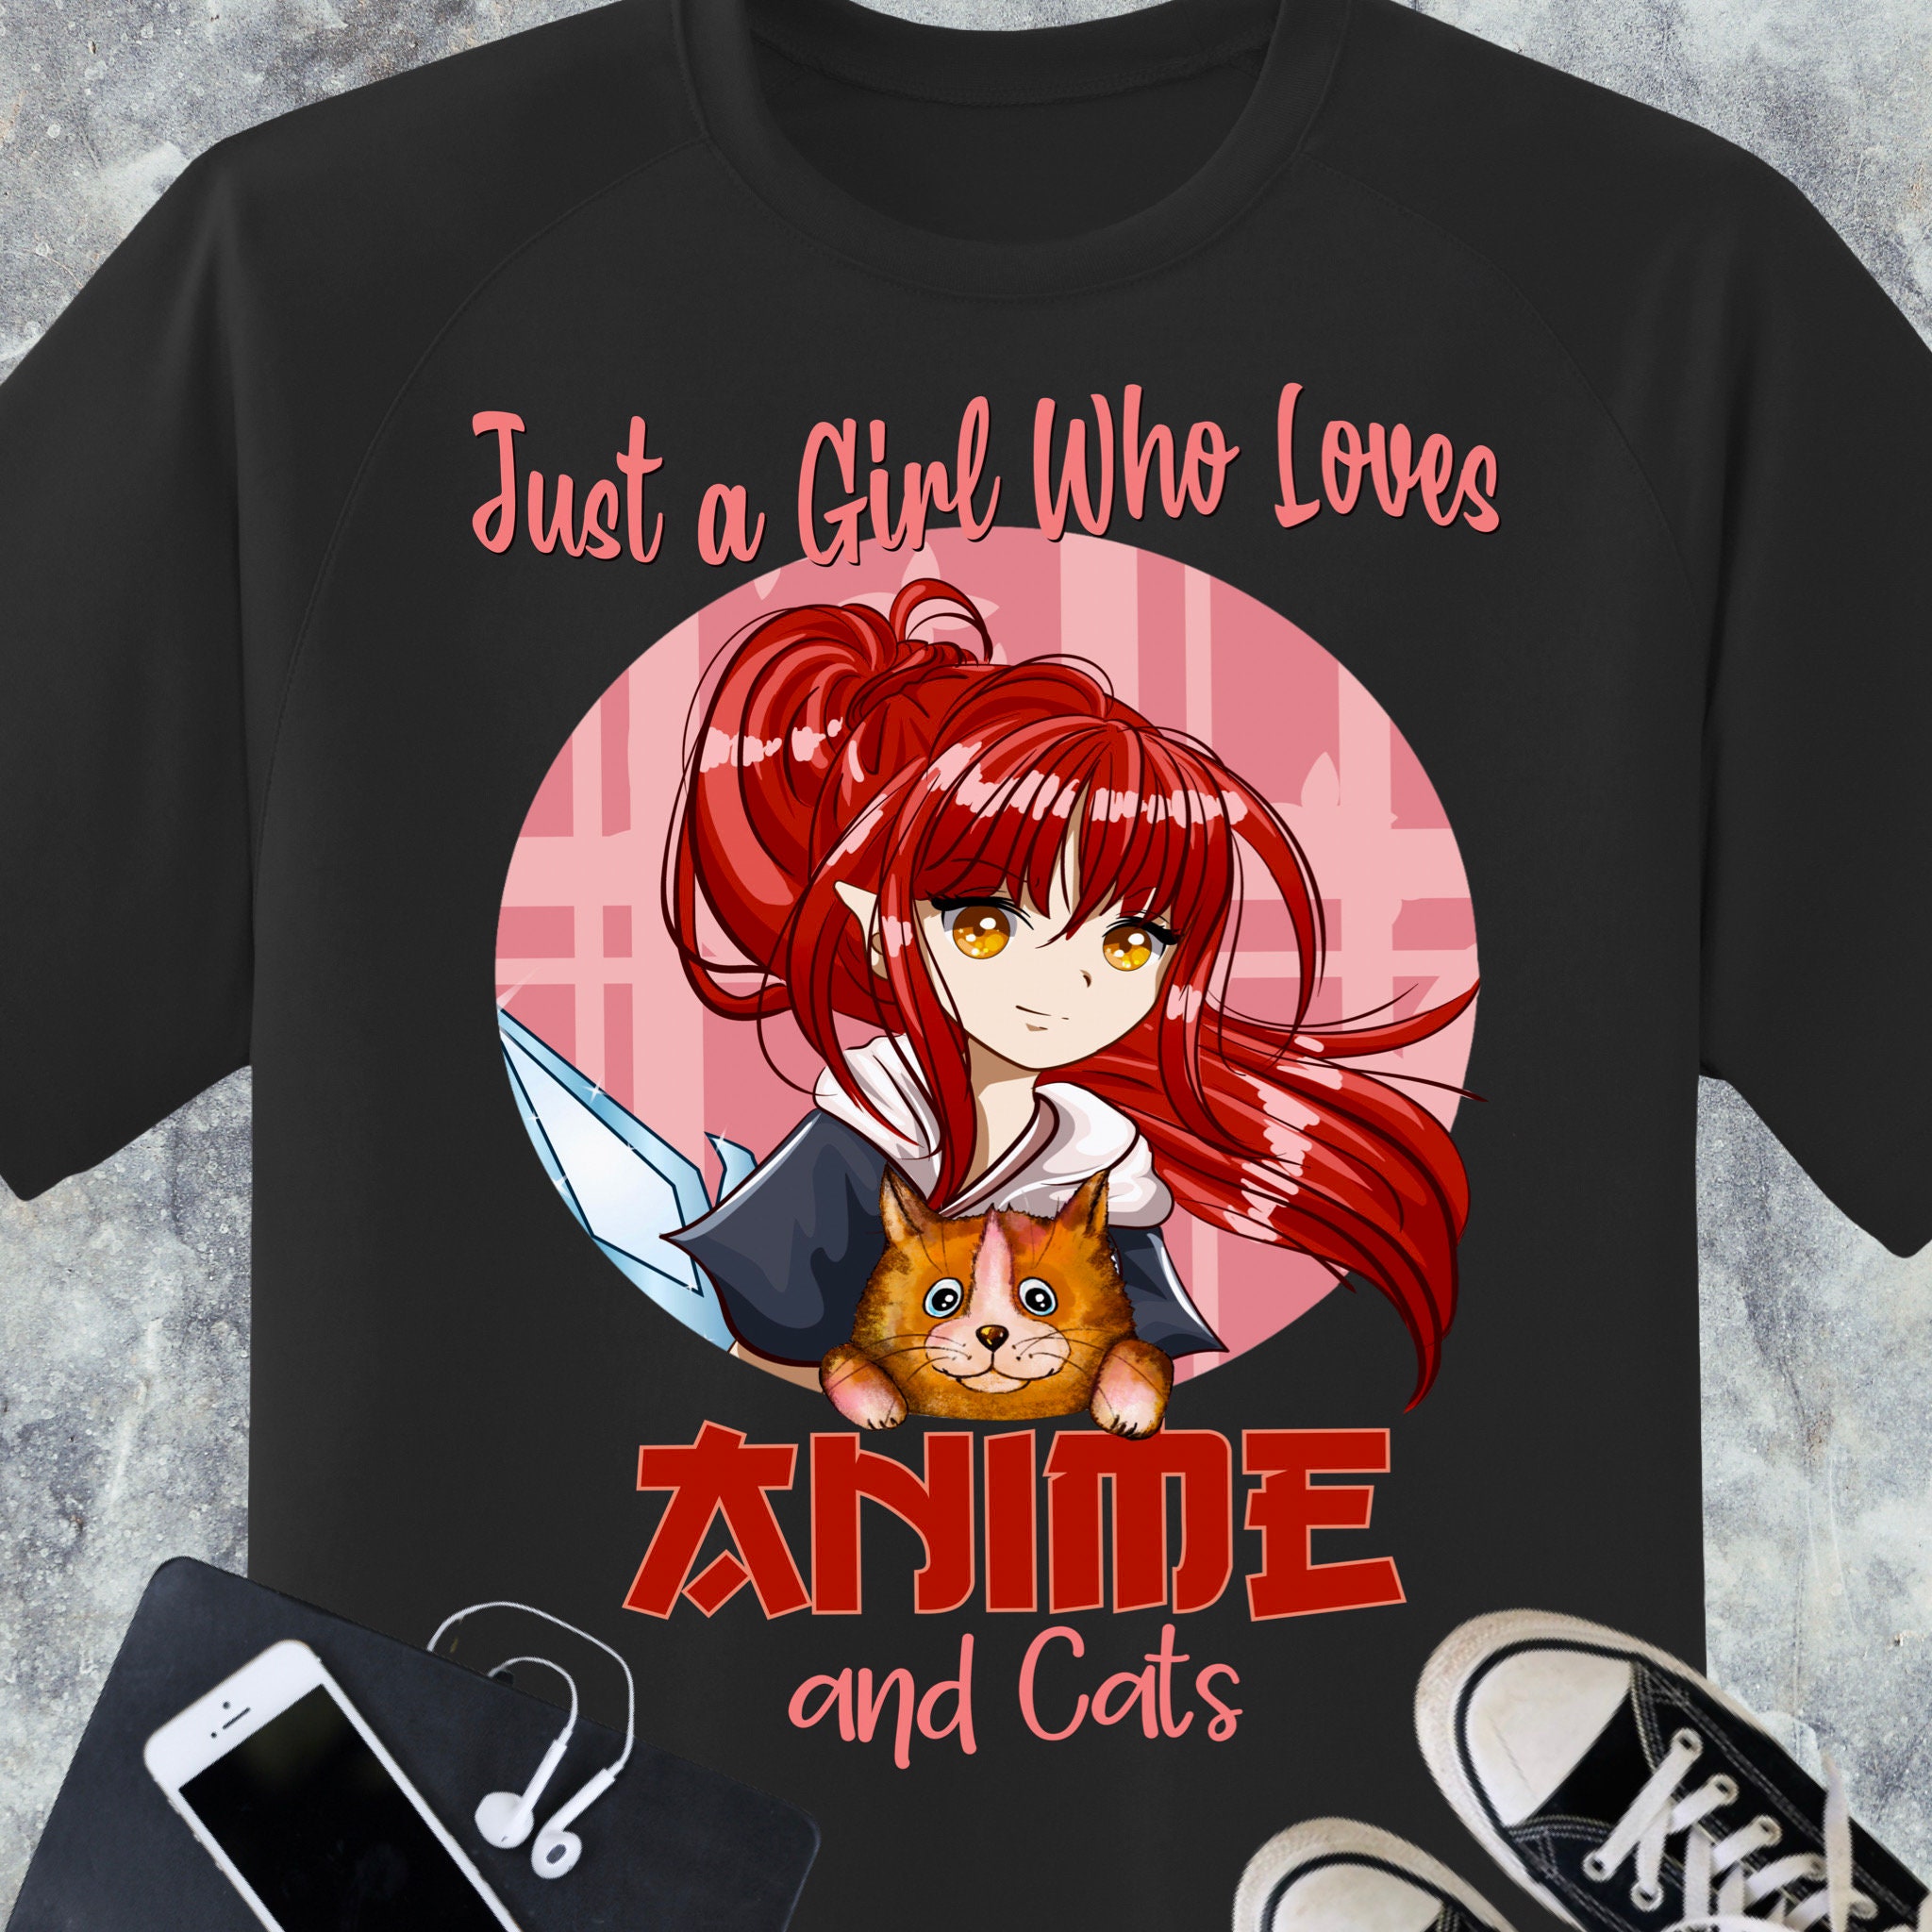 Just A Girl Who Loves Anime Shirt Otaku Clothing Gifts for Teen